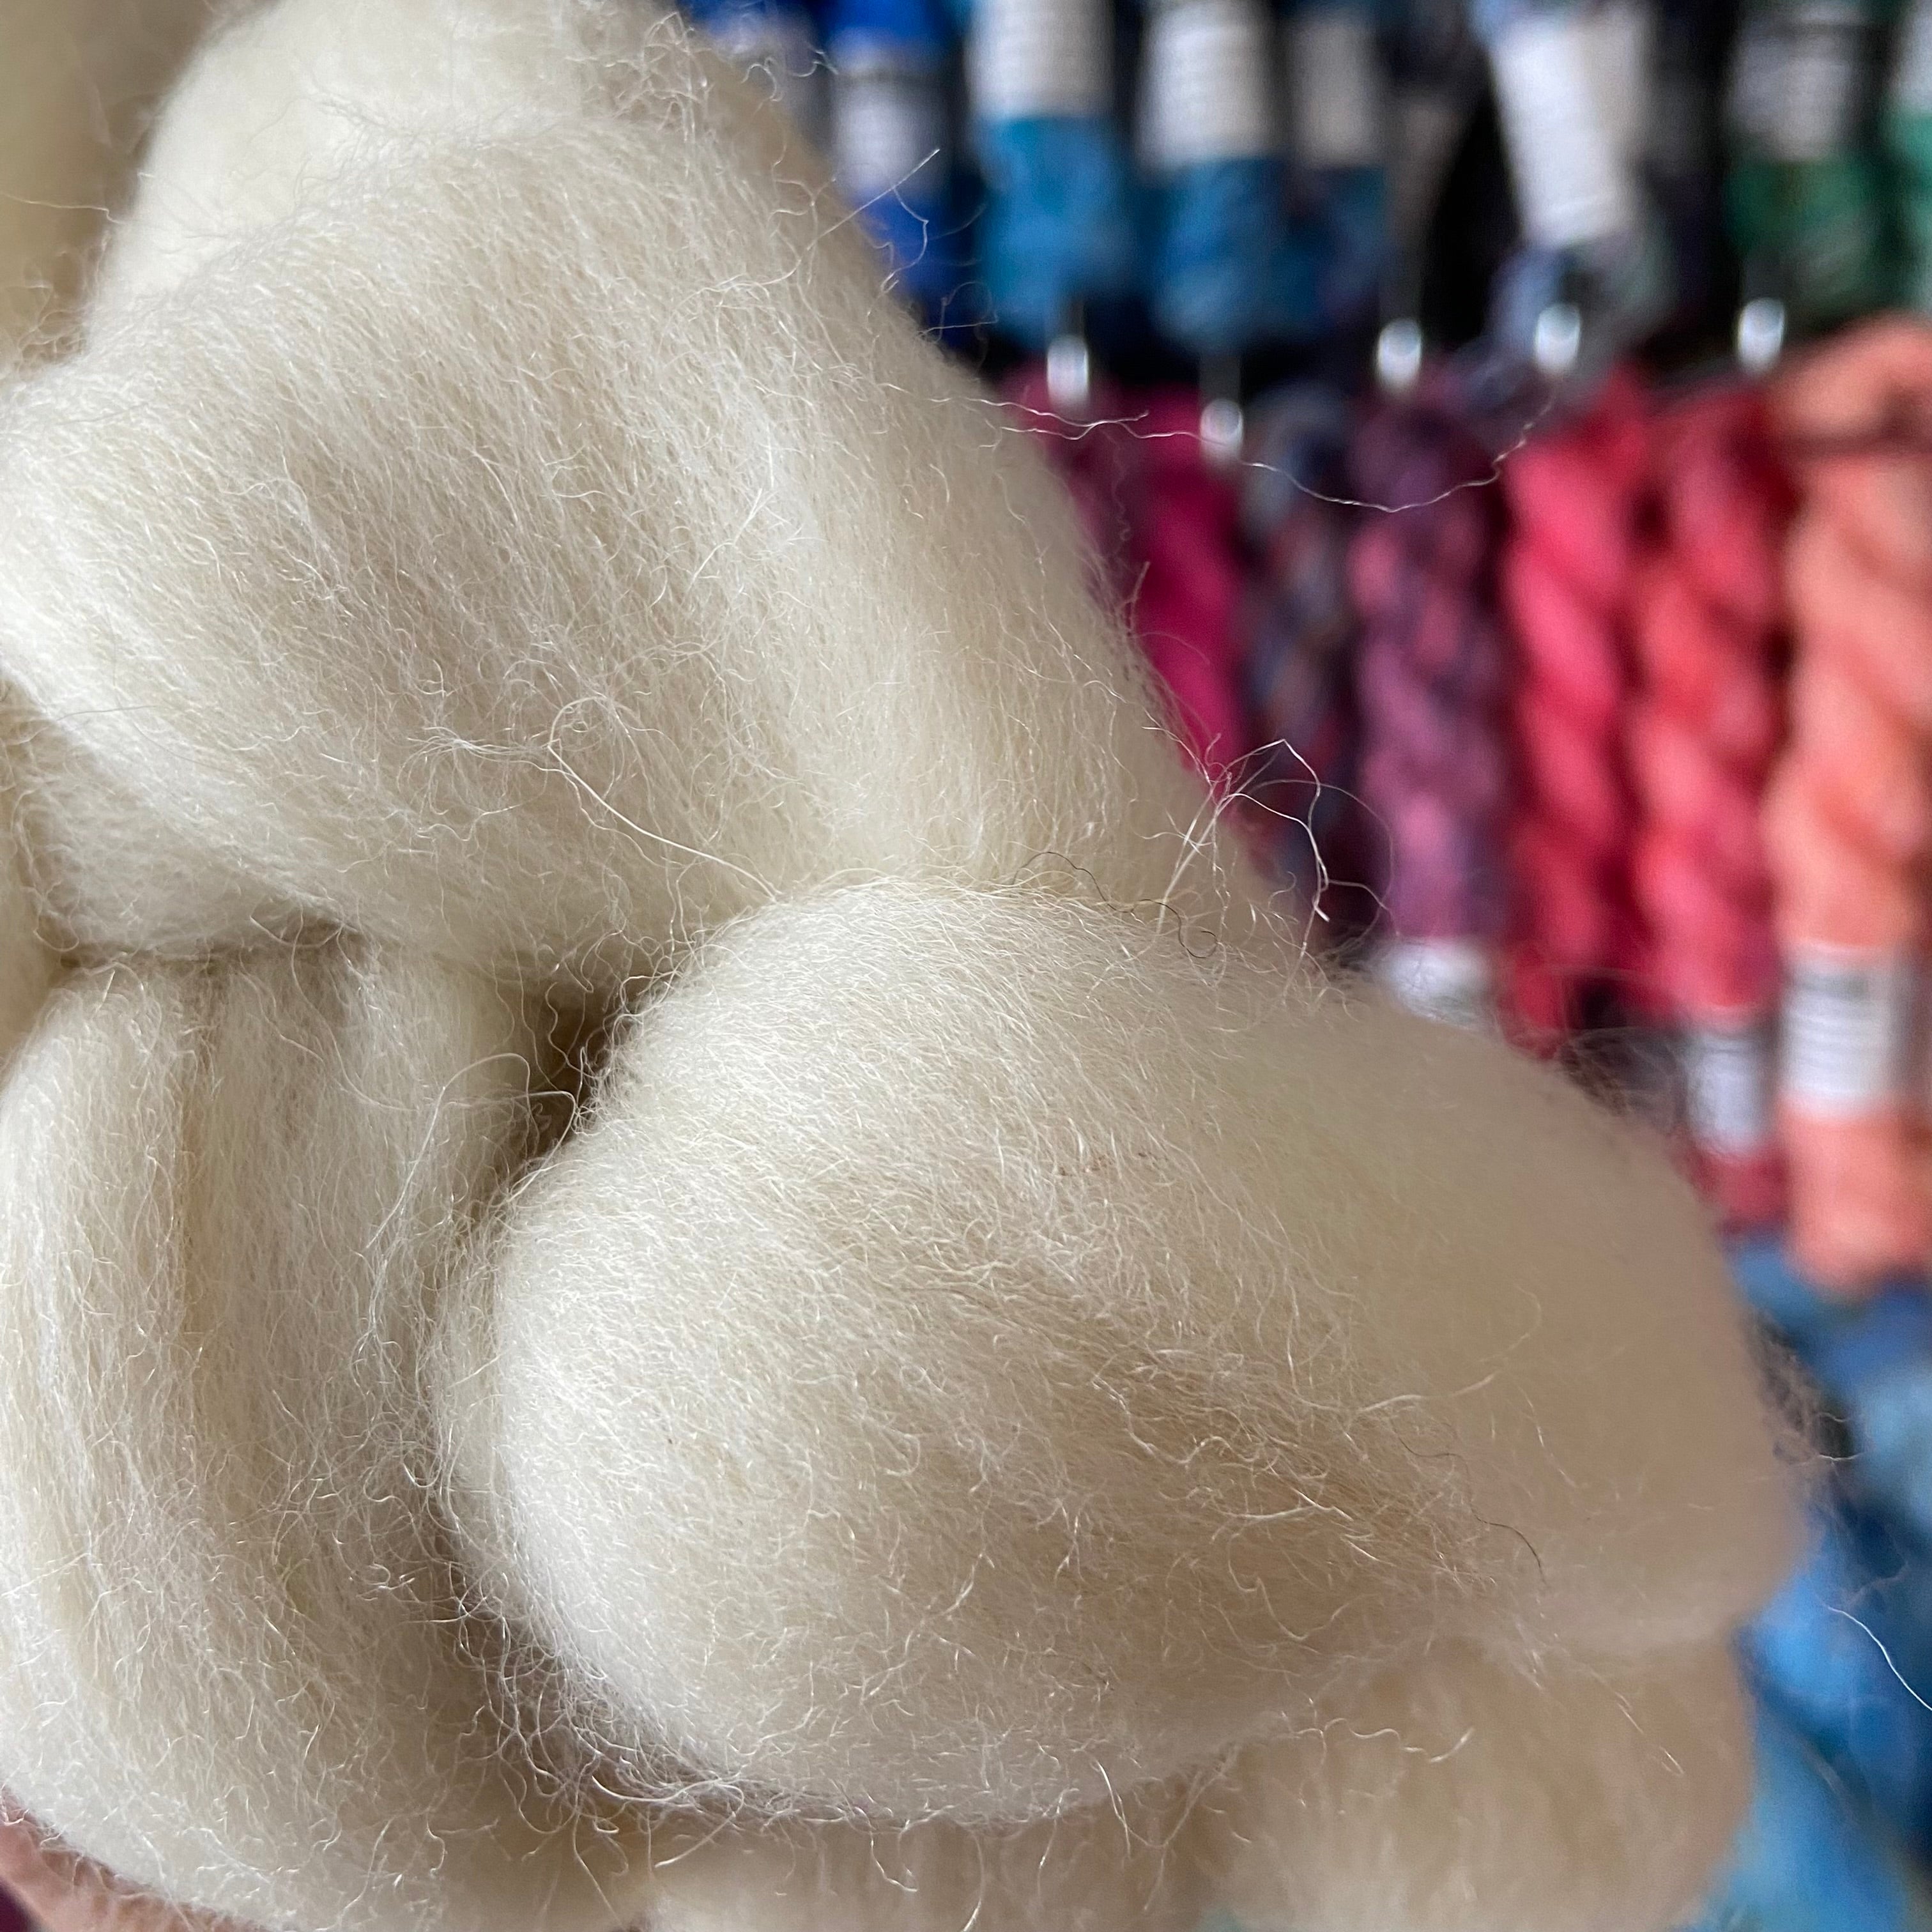 Nudie - Undyed British Sheltand - 100g Top in a Spinners Braid